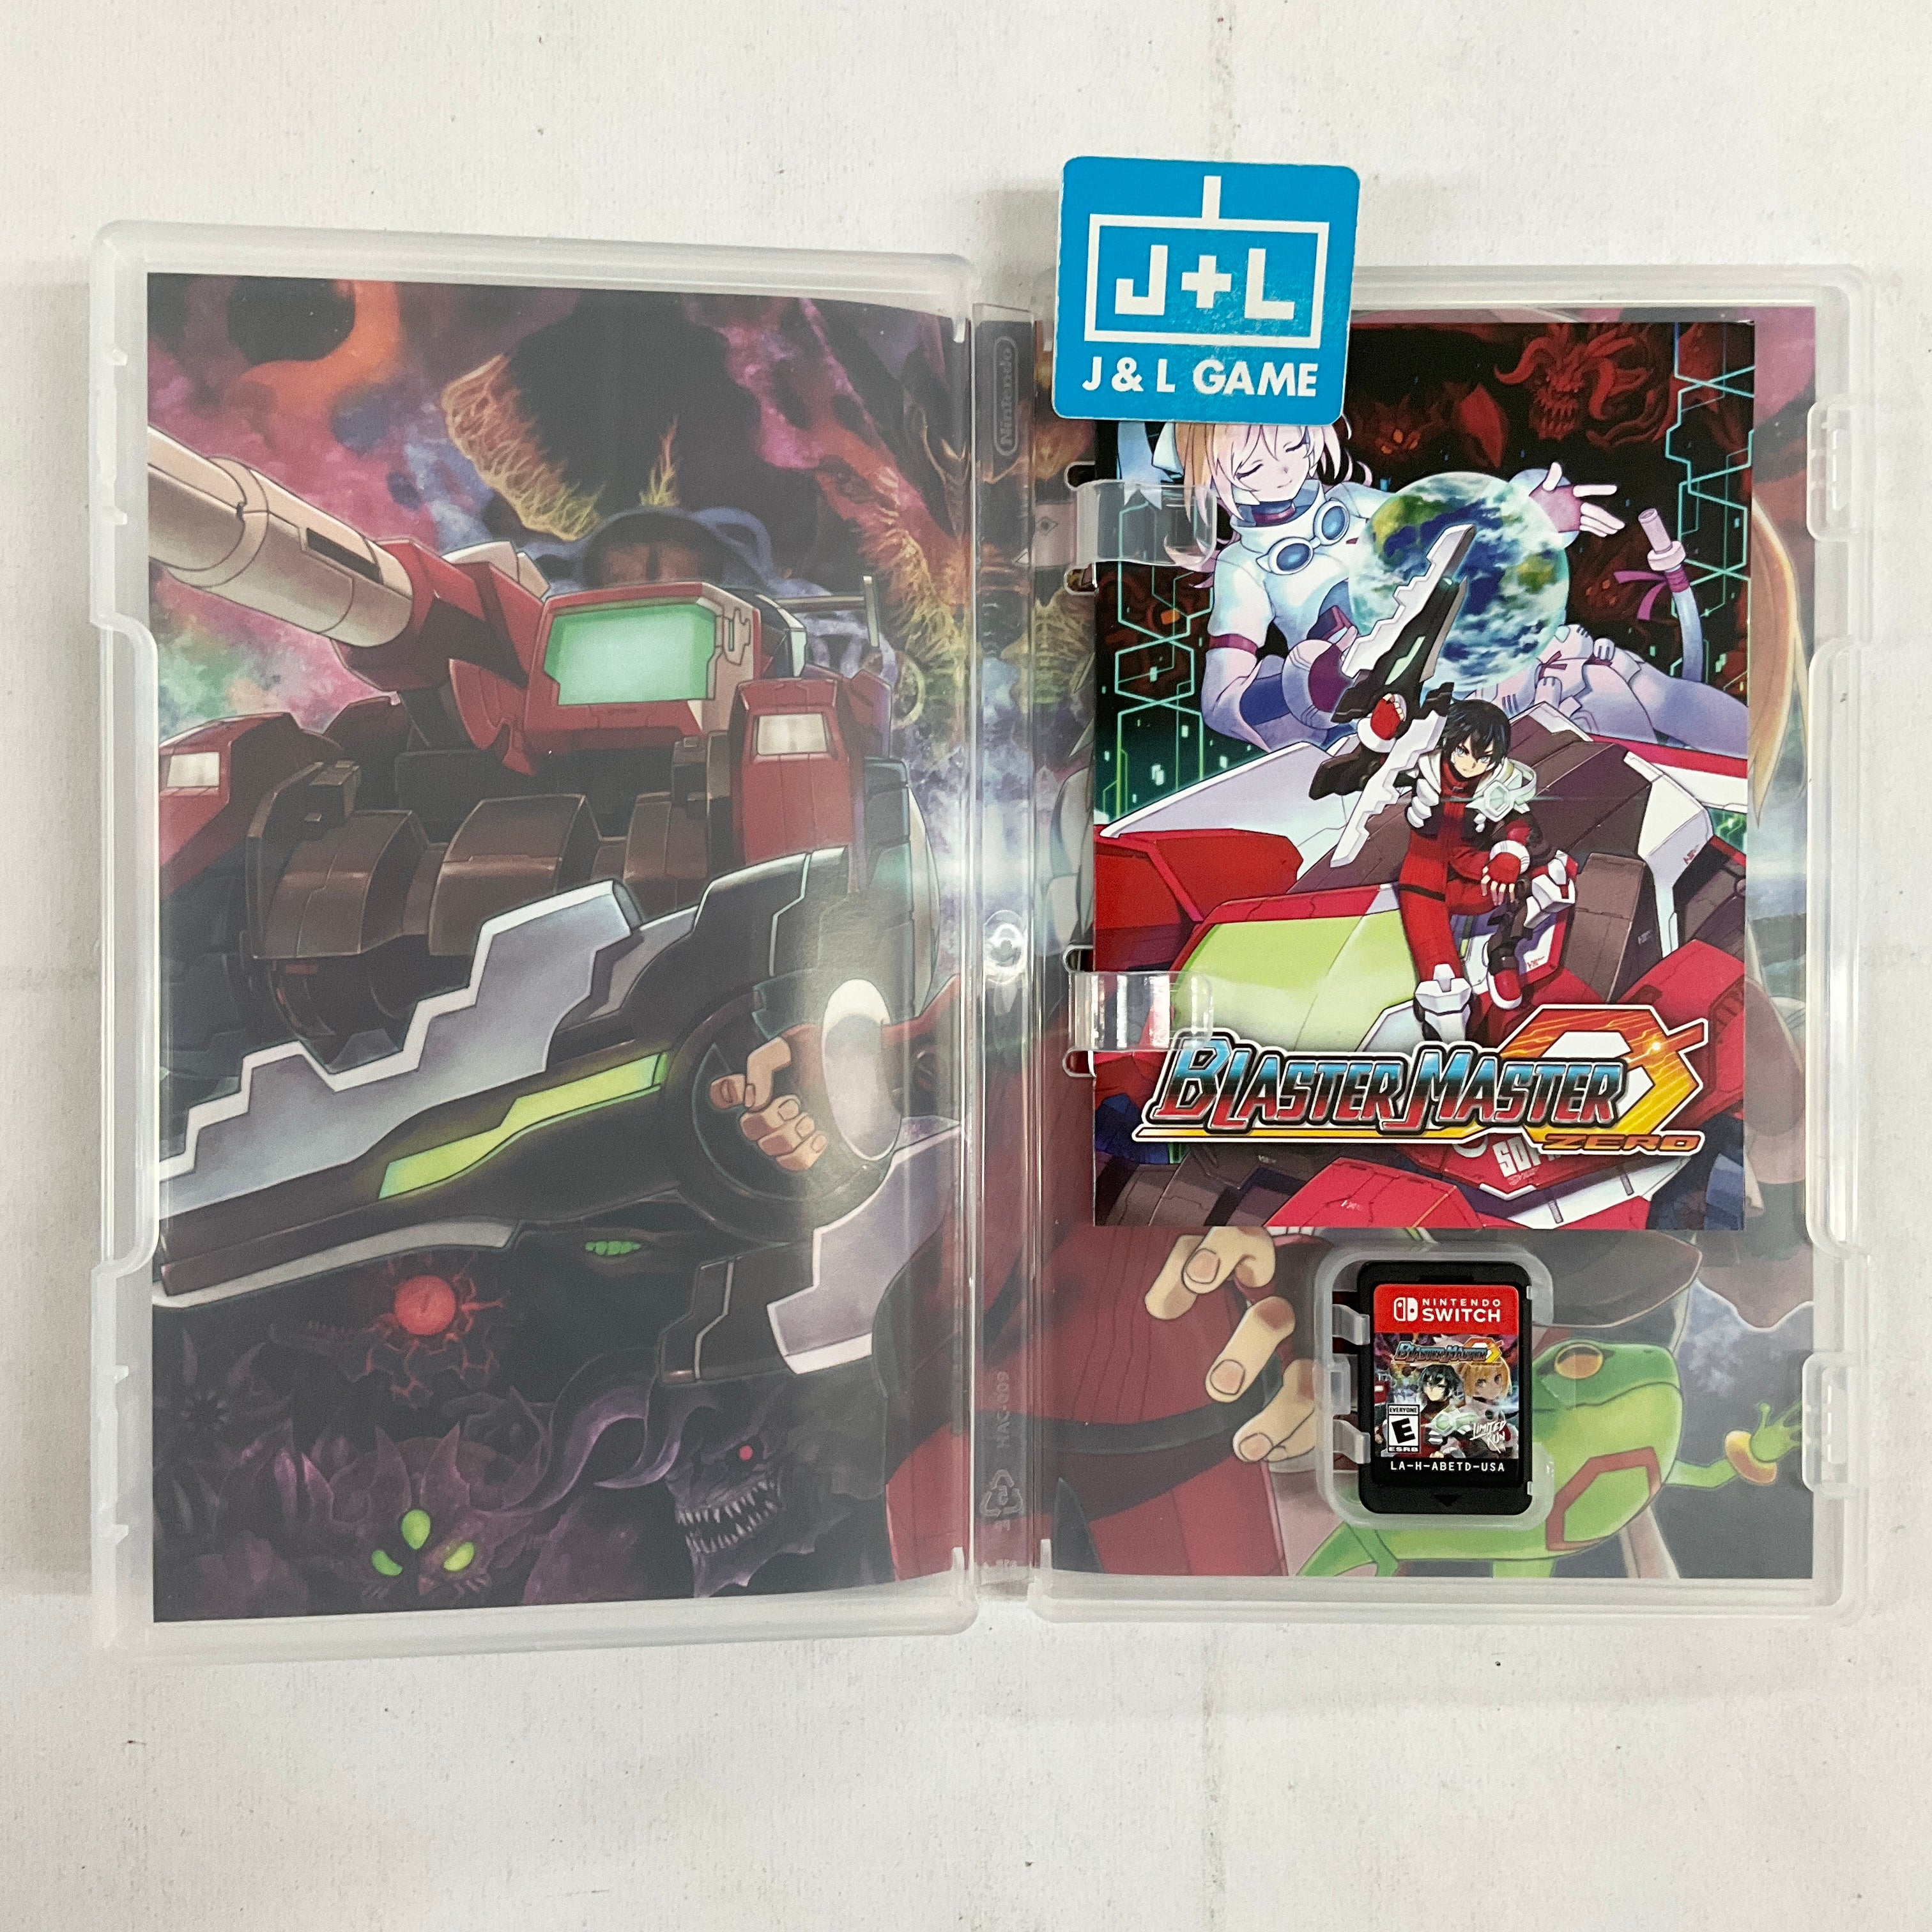 Blaster Master Zero (Limited Run #073) - (NSW) Nintendo Switch [Pre-Owned] Video Games Limited Run Games   